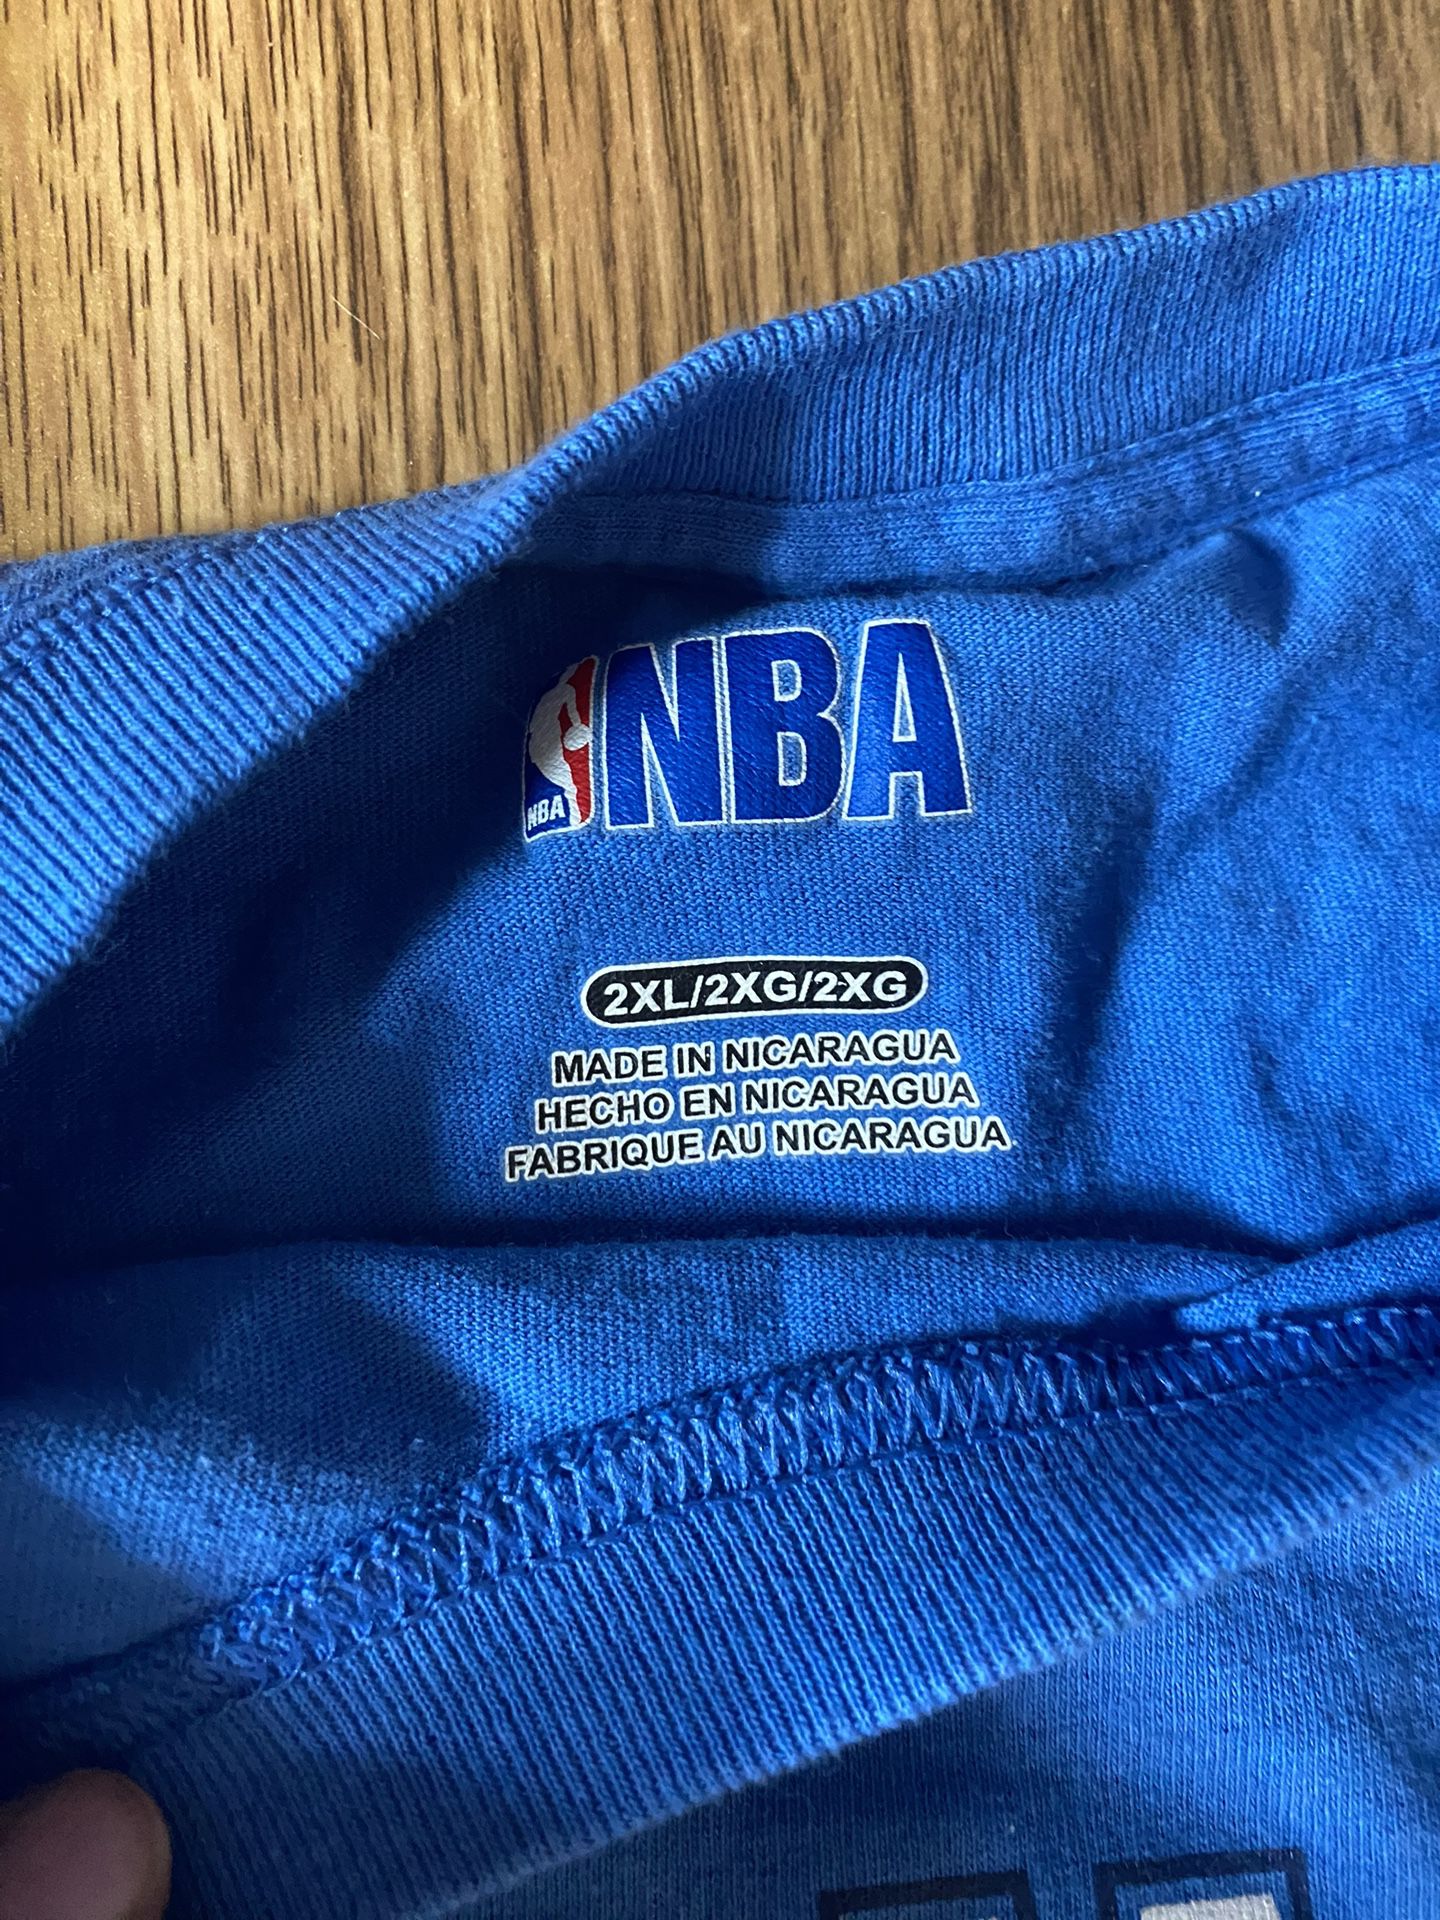 Nba Warm Up Hoodie - Okc Thunder for Sale in Tucson, AZ - OfferUp